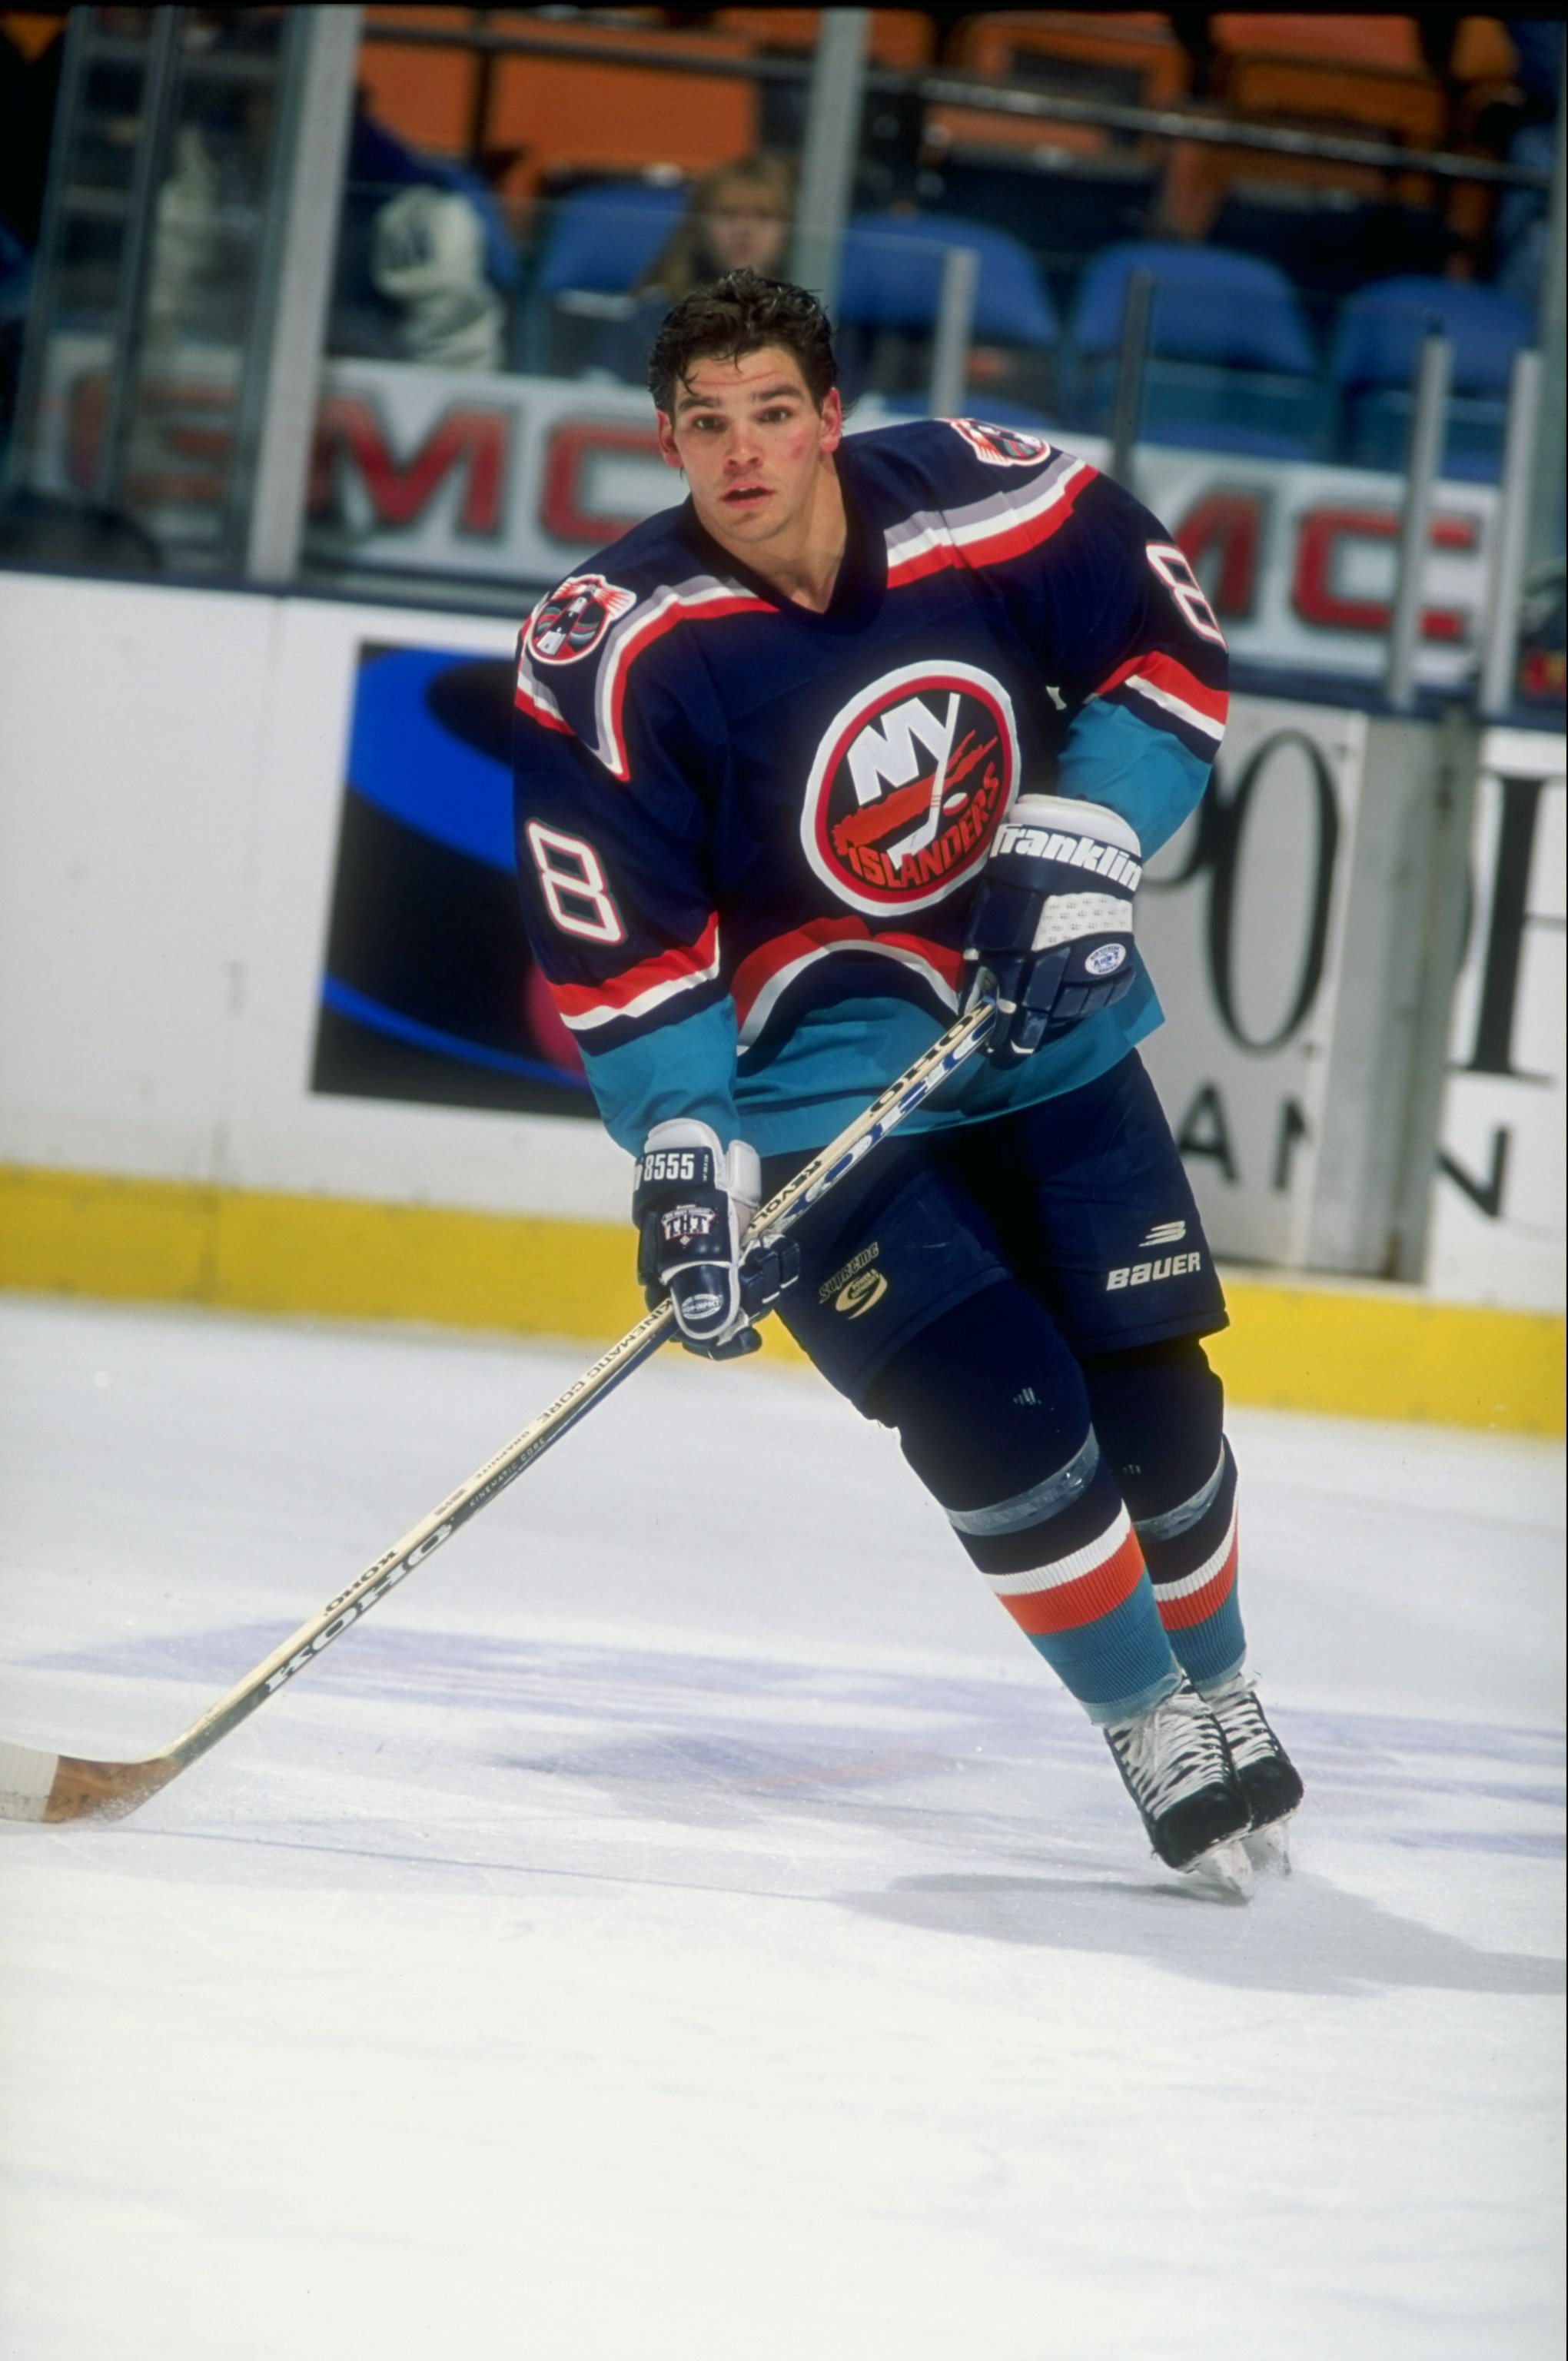 20 Nov 1997:  Steve Webb #88 of the New York Islanders in action during a game against the New Jersey Devils at the Continental Airlines Arena in East Rutherford, New Jersey.  The Devils defeated the Islanders 5-1. Mandatory Credit: Al Bello  /Allsport